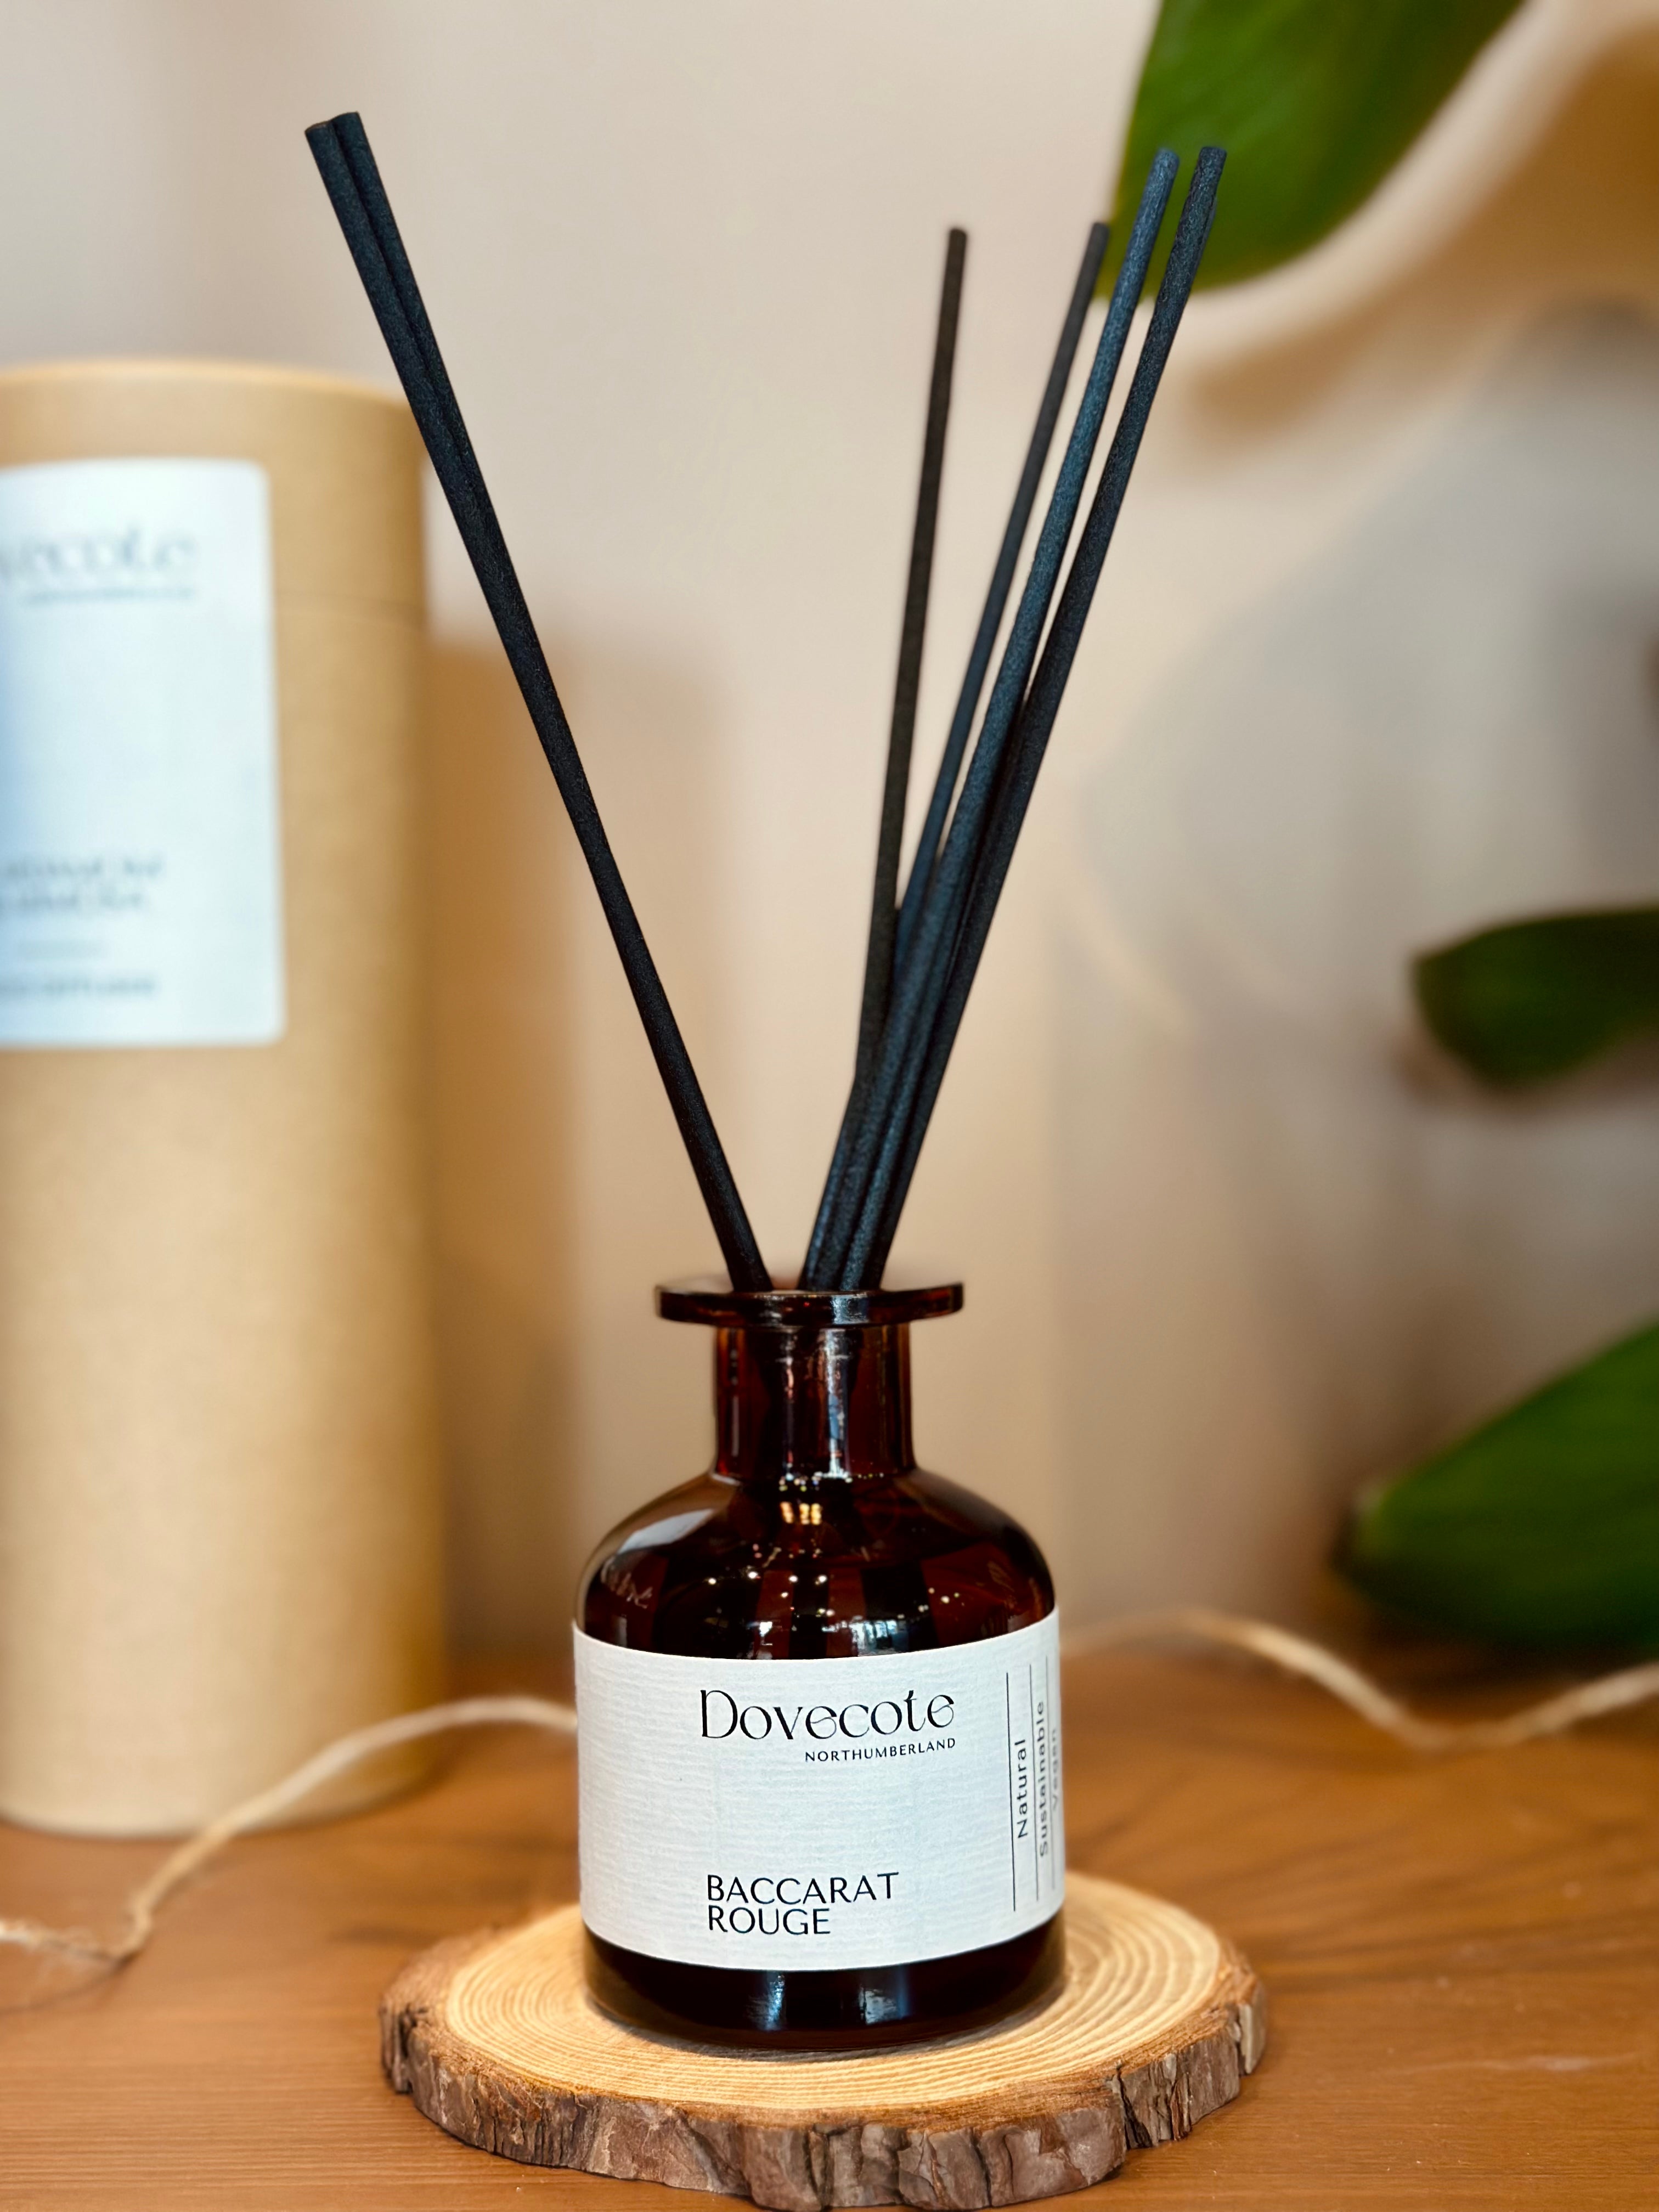 Amber Reed Diffuser